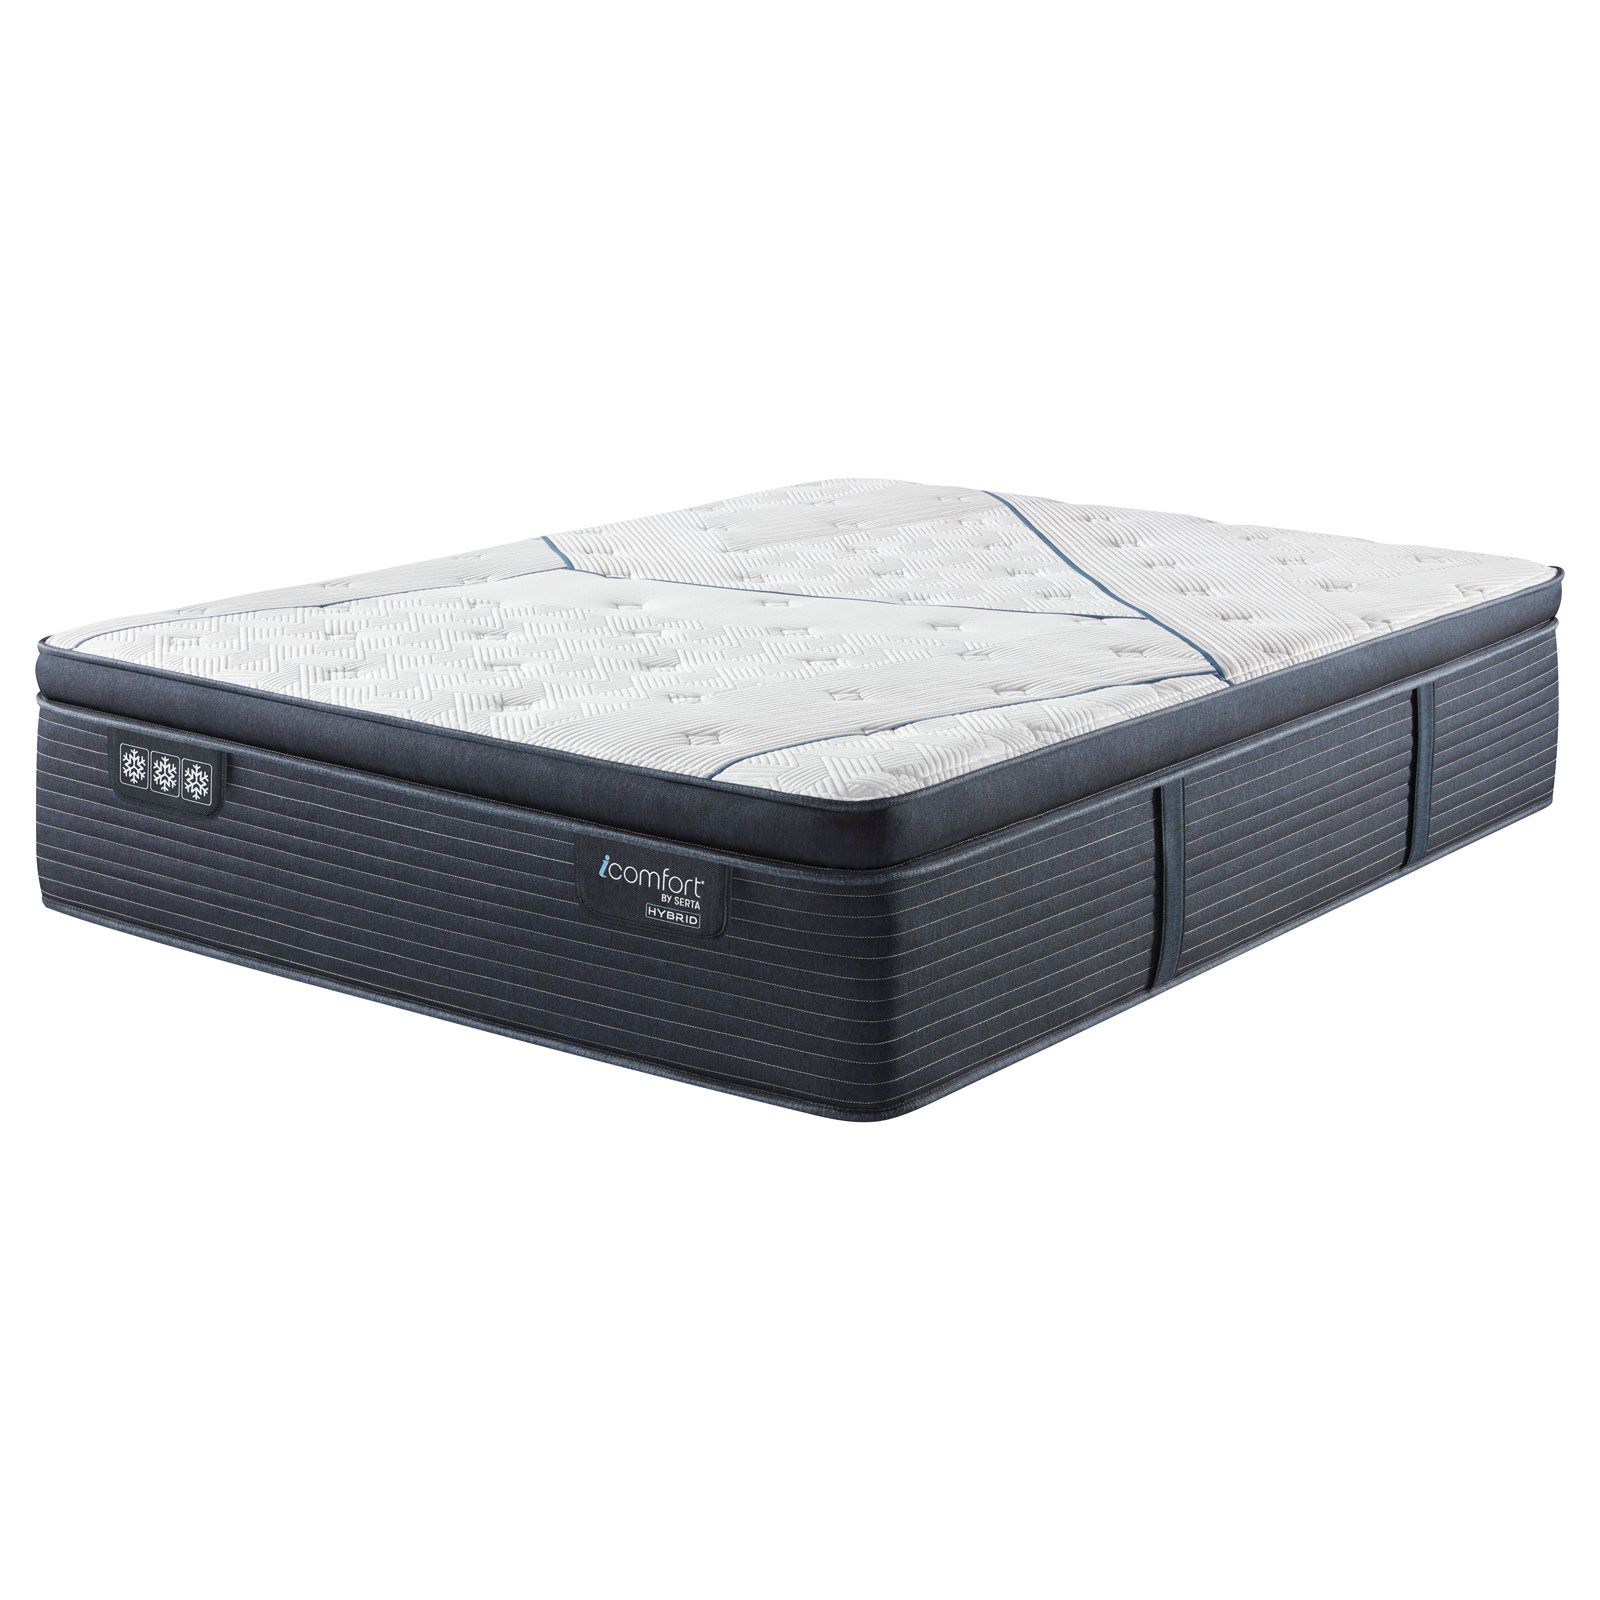 With the Serta® iComfort mattress, cool, supportive sleep is the